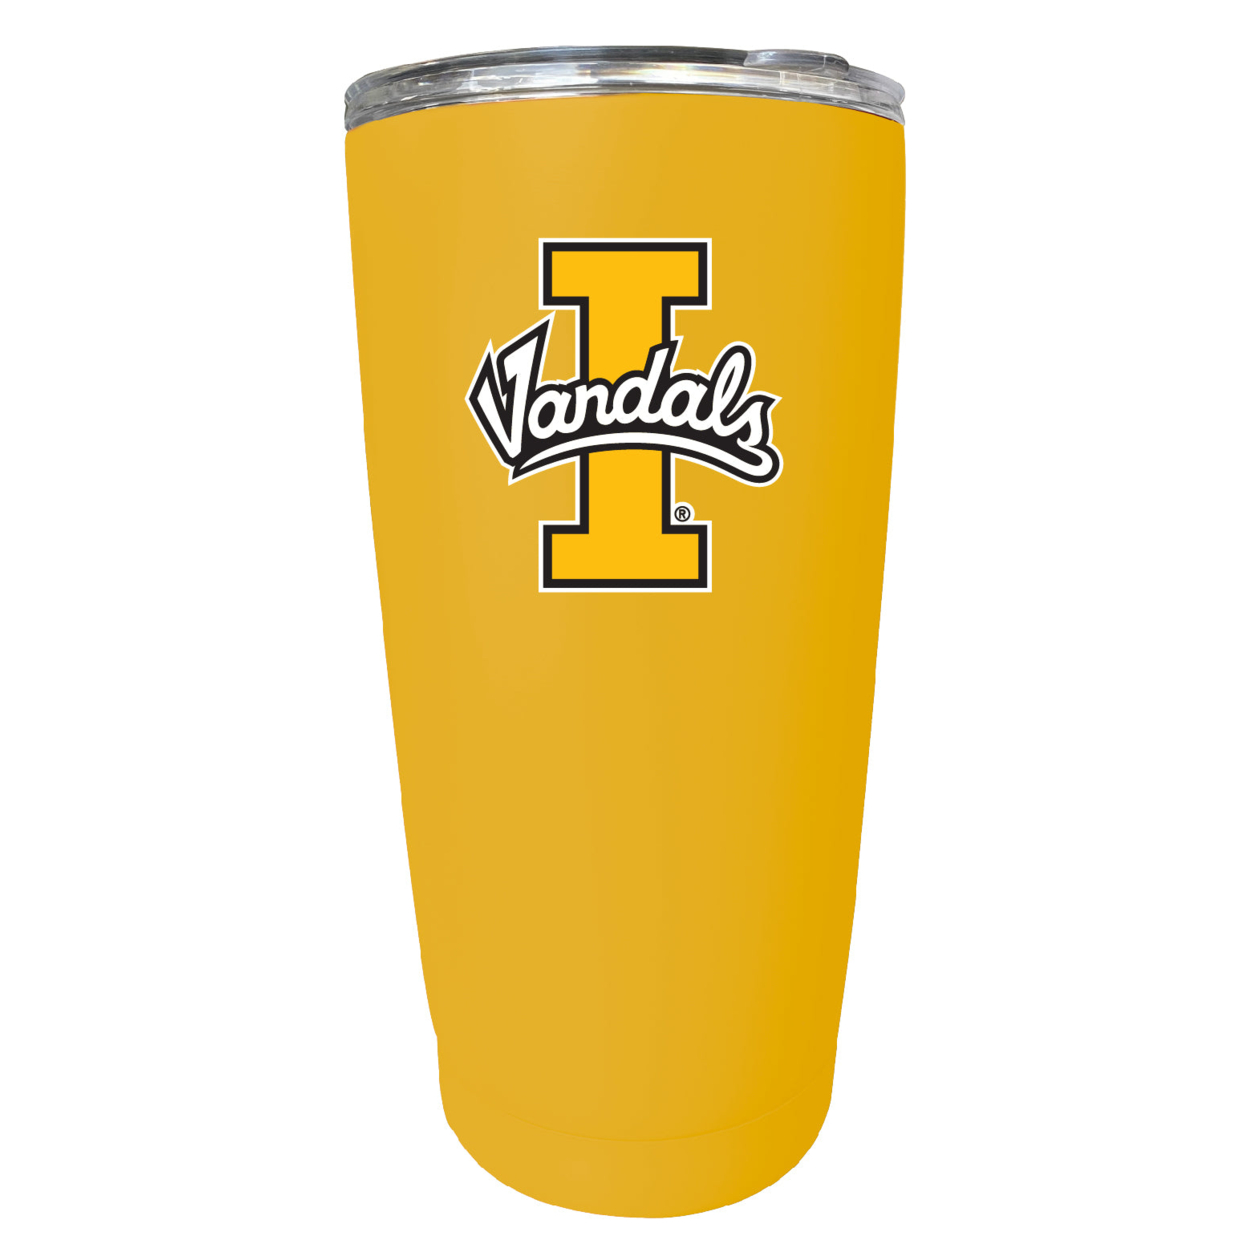 Idaho Vandals 16 Oz Stainless Steel Insulated Tumbler - Gray